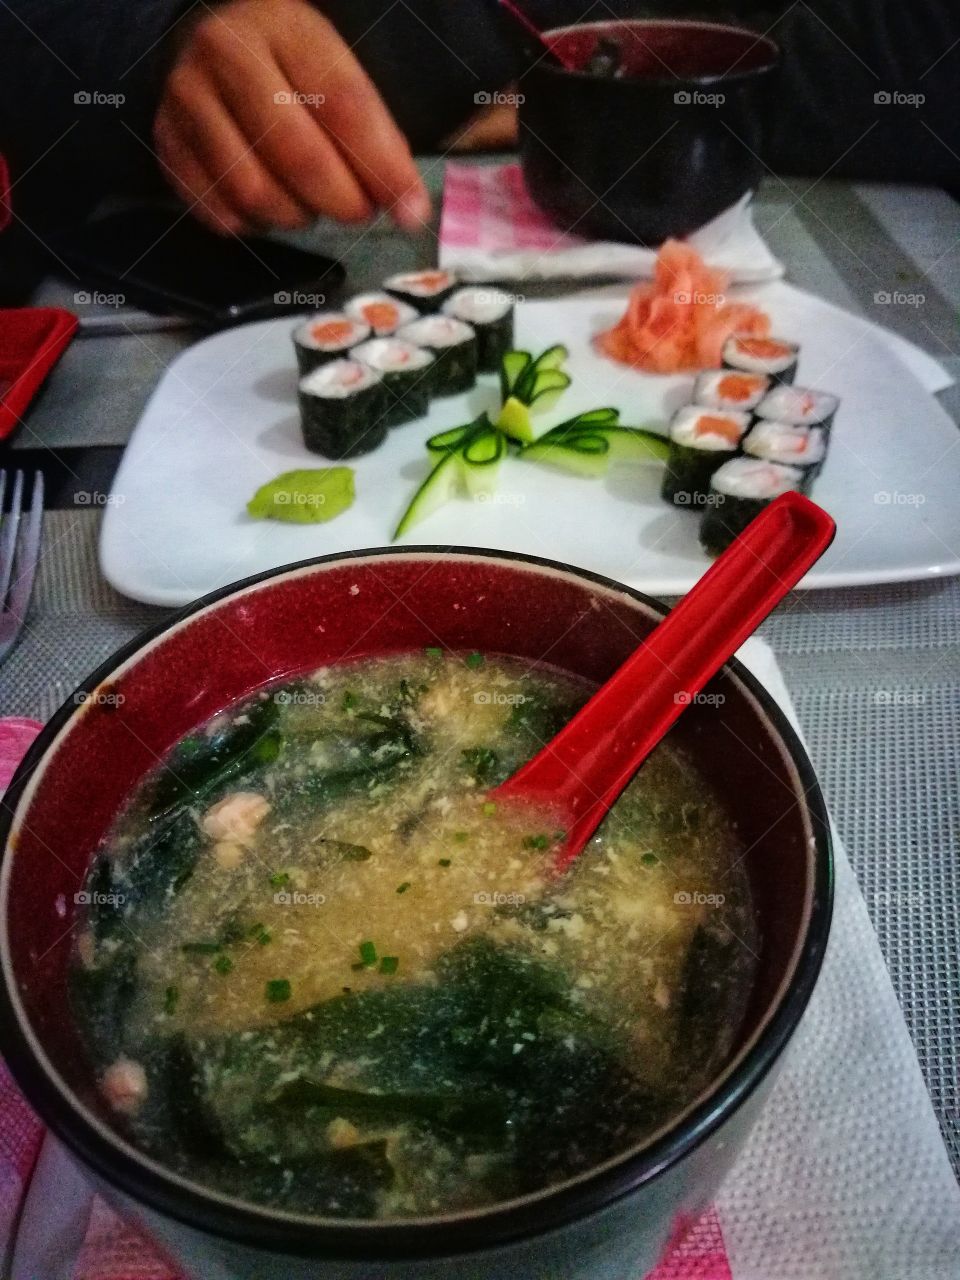 Sushi and fish soup